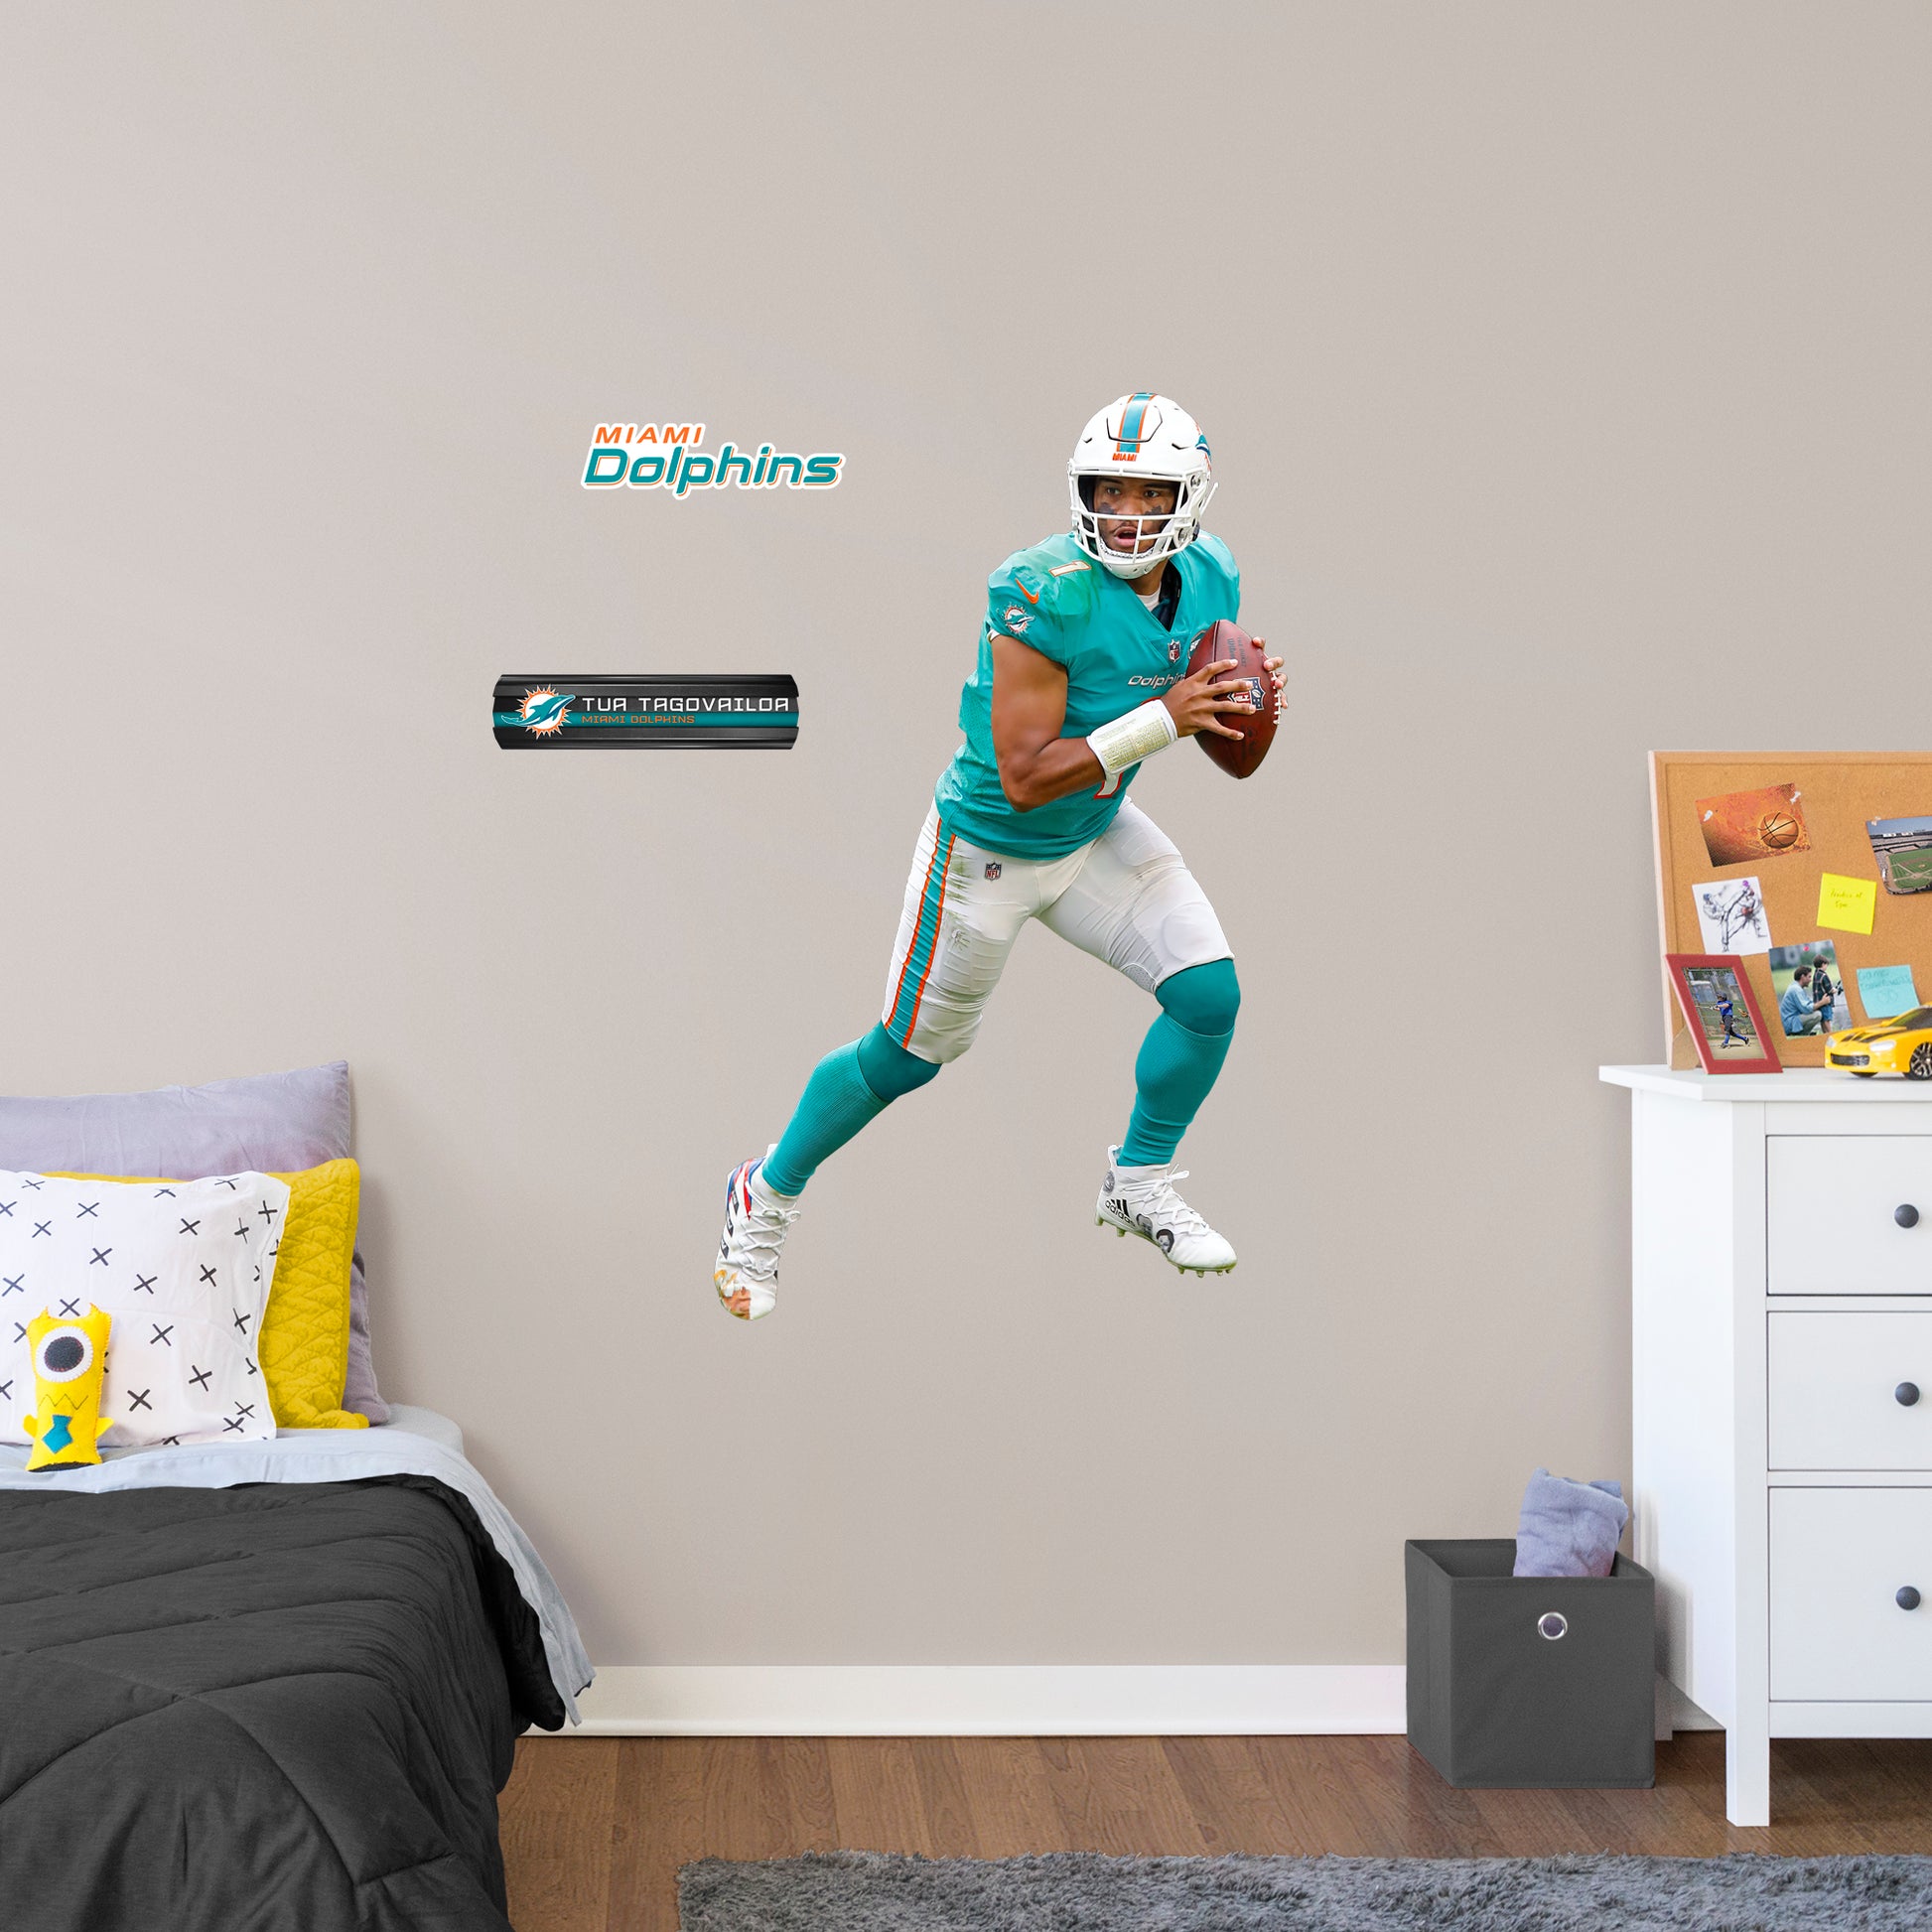 Giant Athlete + 2 Decals (31"W x 51"H) Bring the action of the NFL into your home with a wall decal of Tua Tagovailoa! High quality, durable, and tear resistant, you'll be able to stick and move it as many times as you want to create the ultimate football experience in any room!